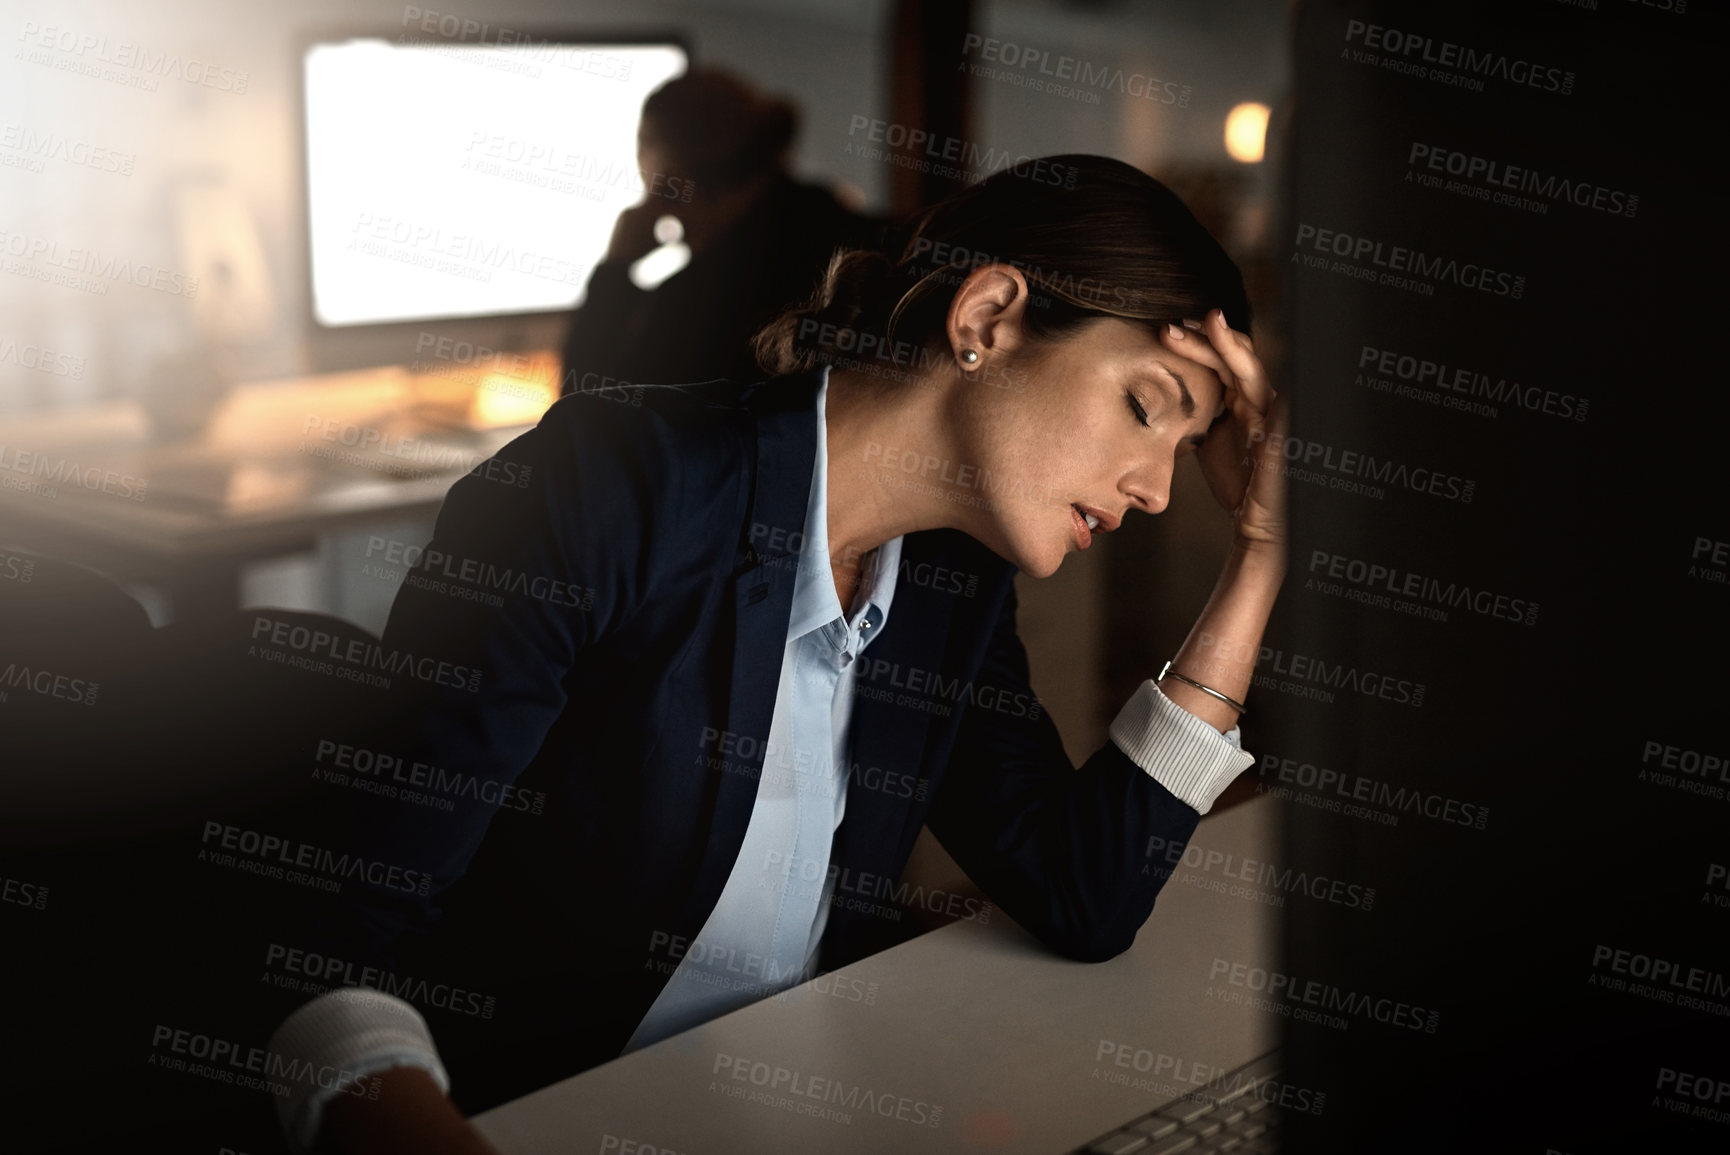 Buy stock photo Tired, woman or stress in overtime, burnout or glitch of it, digital or software question in office. Female employee, sleep or eyes closed at headache experience of tech 404 as corporate workaholic